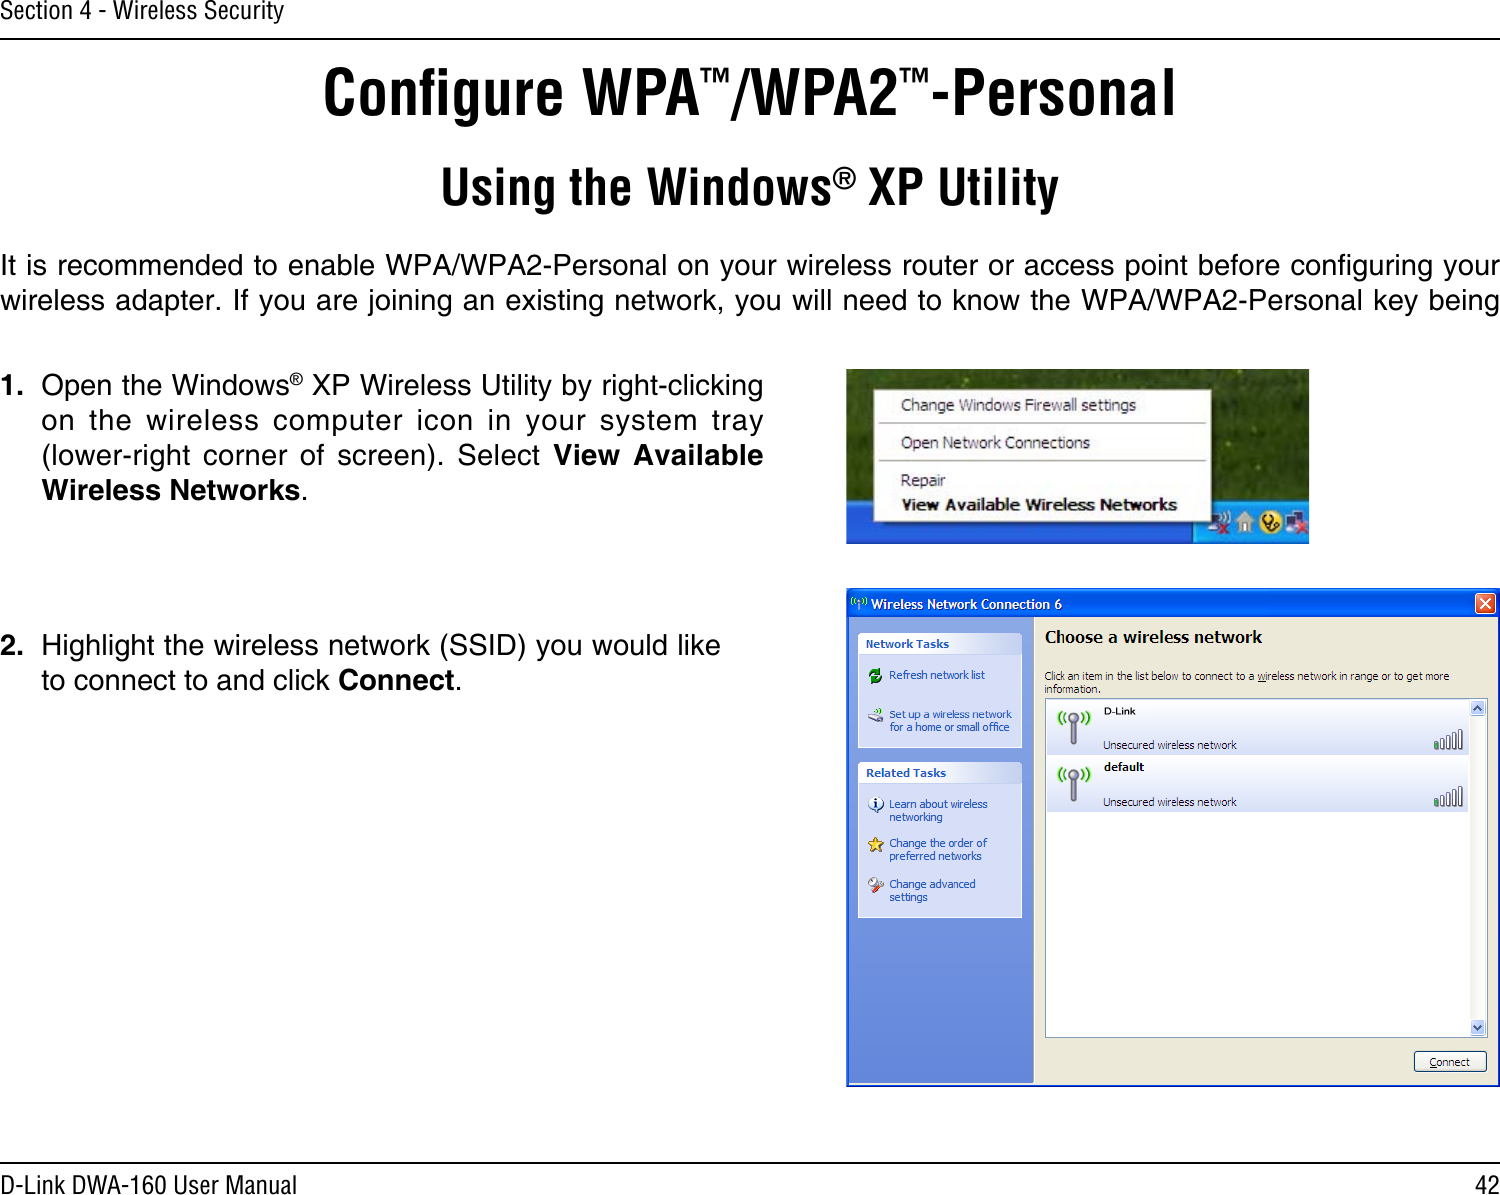 42D-Link DWA-160 User ManualSection 4 - Wireless SecurityConﬁgure WPA™/WPA2™-PersonalUsing the Windows® XP UtilityIt is recommended to enable WPA/WPA2-Personal on your wireless router or access point before conguring your wireless adapter. If you are joining an existing network, you will need to know the WPA/WPA2-Personal key being 2.  Highlight the wireless network (SSID) you would like to connect to and click Connect.1.  Open the Windows® XP Wireless Utility by right-clicking on  the  wireless  computer  icon  in  your  system  tray  (lower-right  corner  of  screen).  Select  View  Available Wireless Networks. 